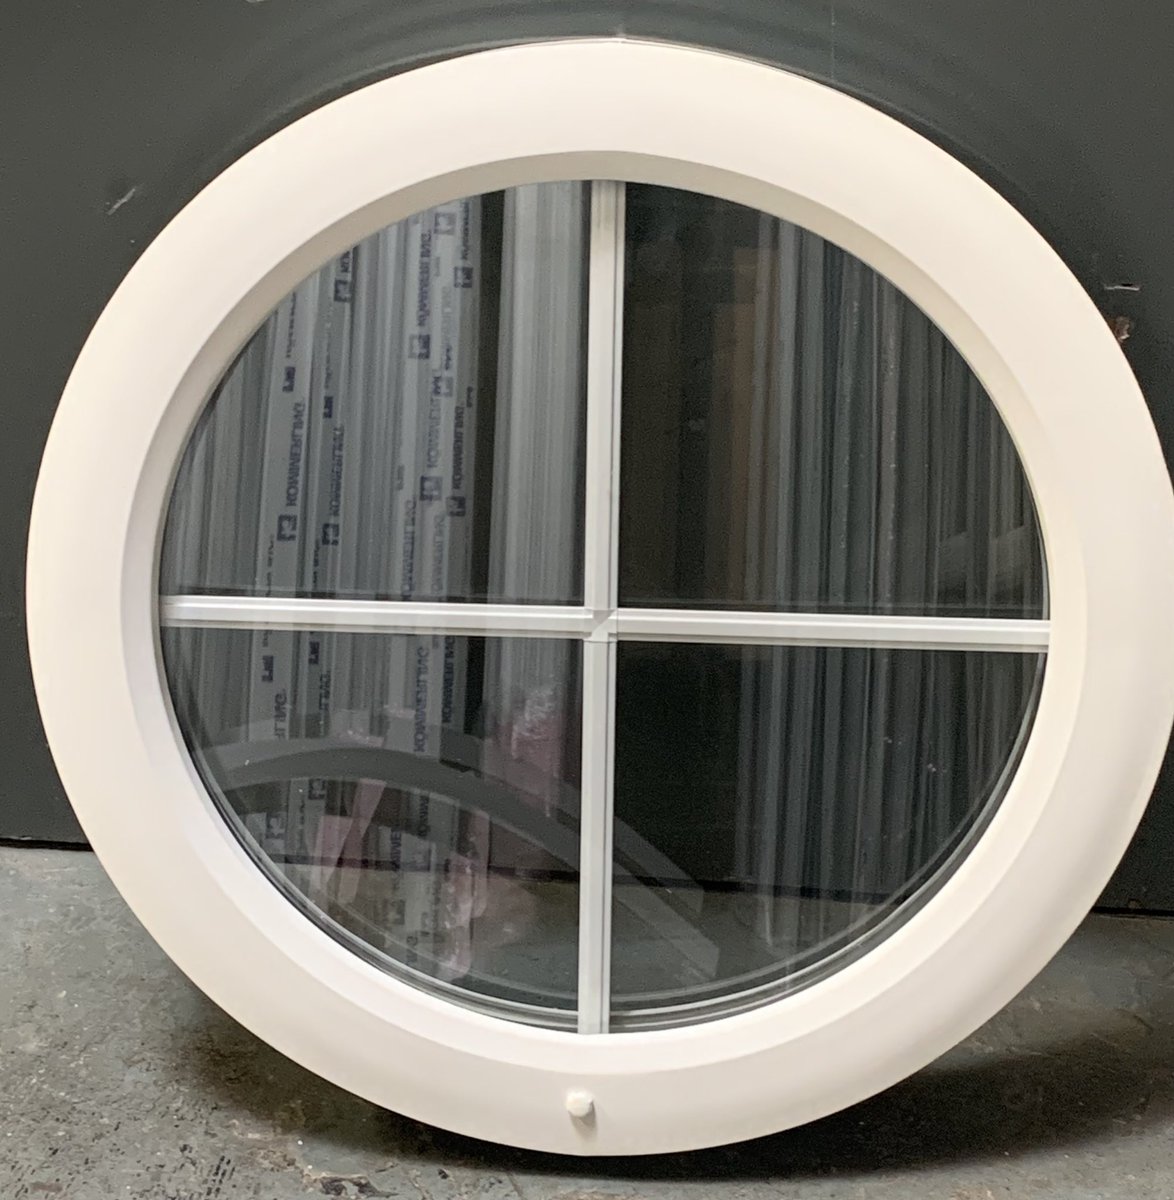 Arched windows and doors at affordable prices #Archedwindows #Windowsanddoors #UPVC #Rehau #Fenestration